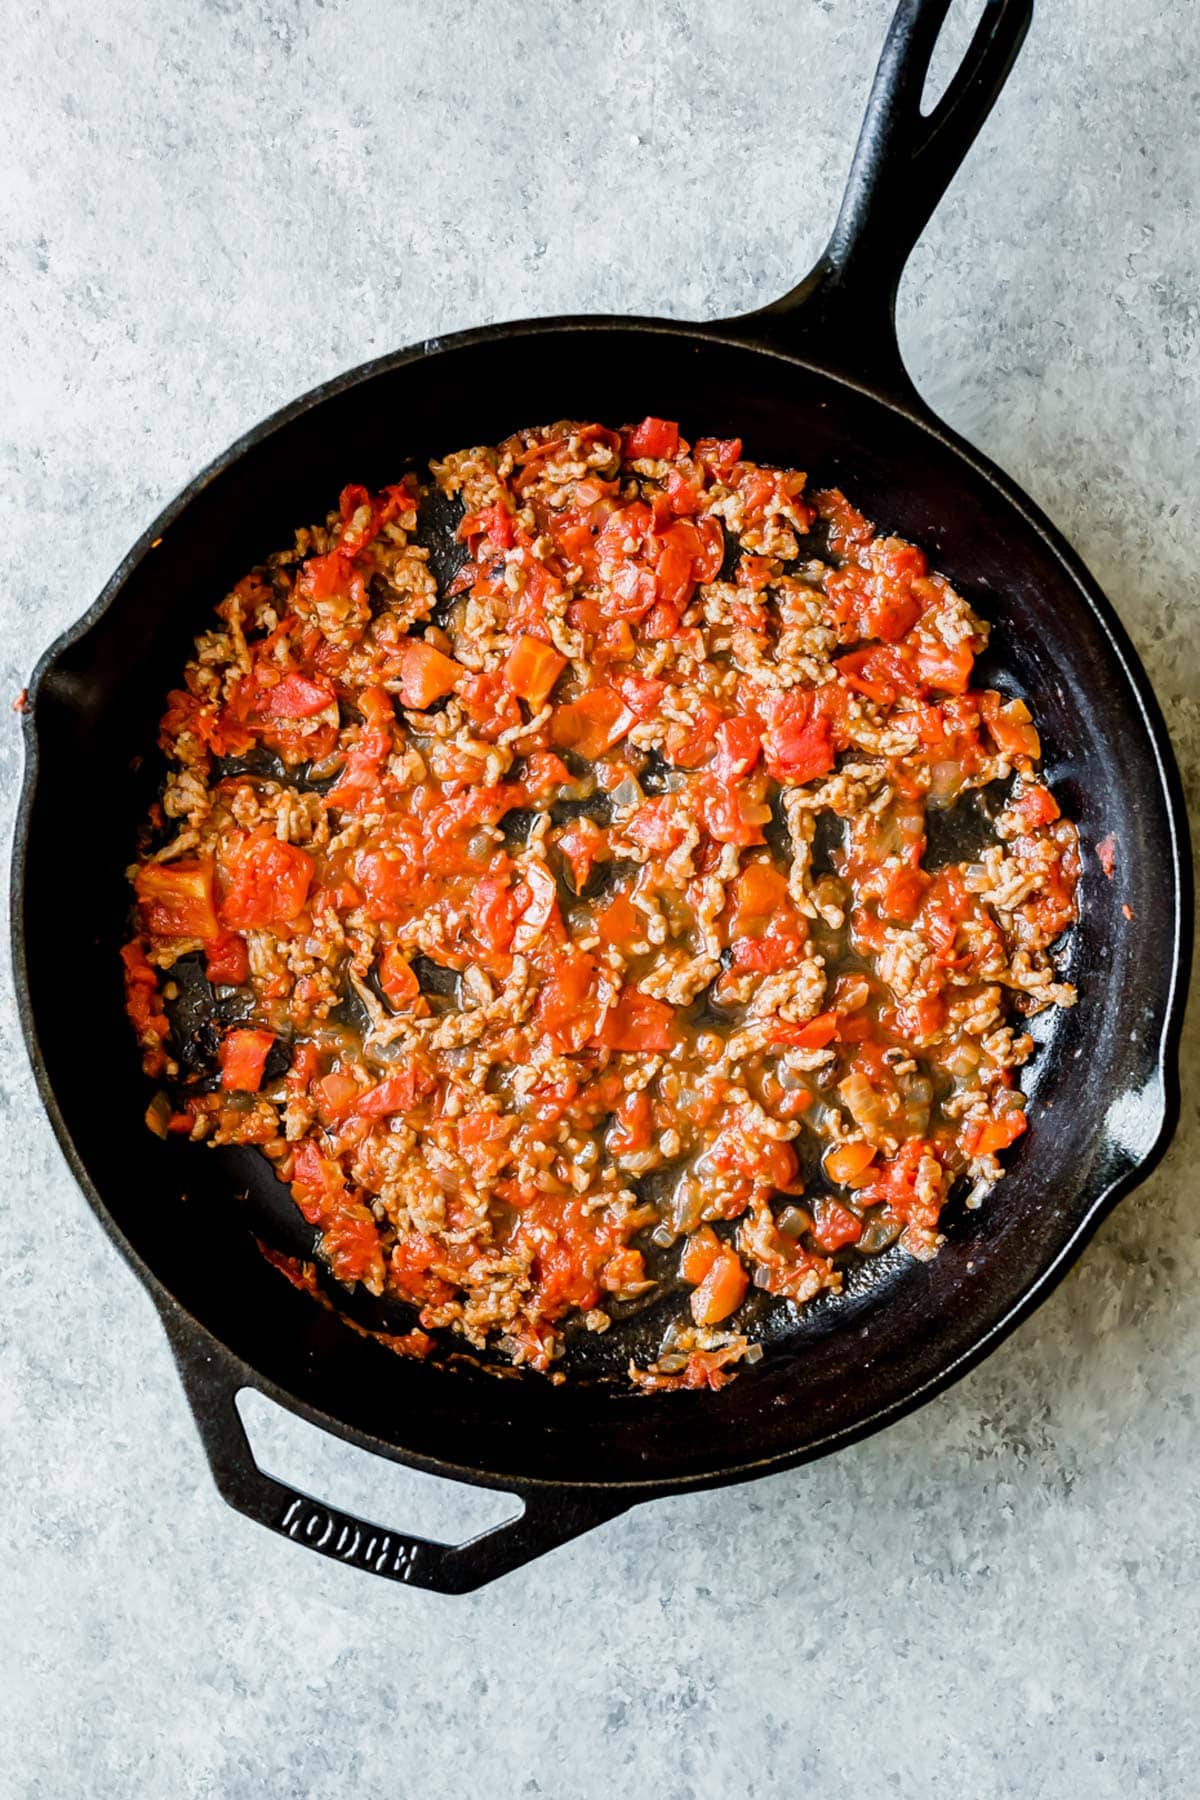 A cast iron skillet with a meat and tomato mixture spread along the bottom.